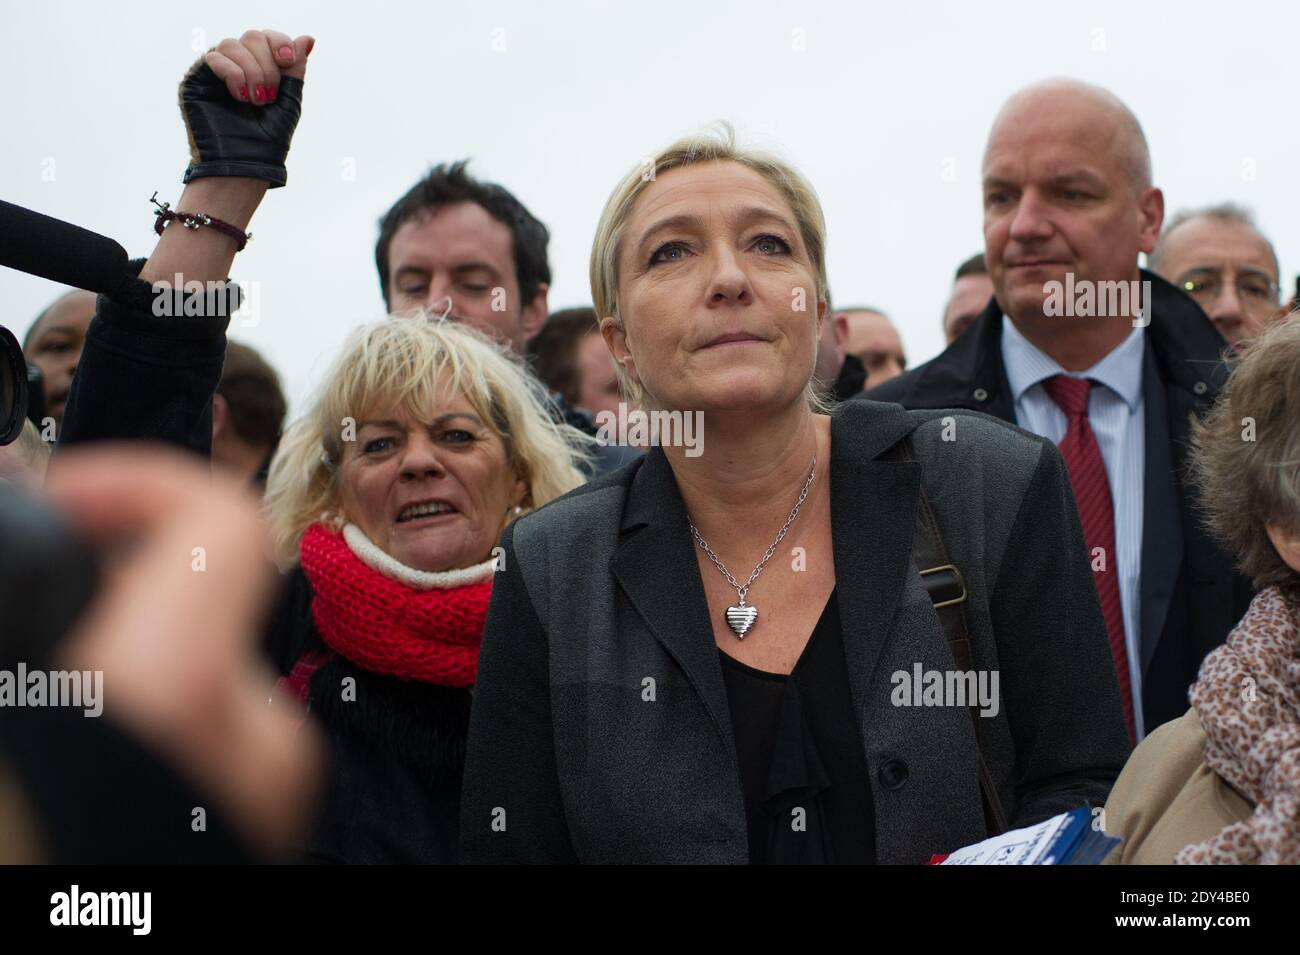 French far-right Front National party president Marine Le Pen walks a  street surrounded by supporters in Calais, northern France on October 24,  2014. Le Pen came to the northern port town to